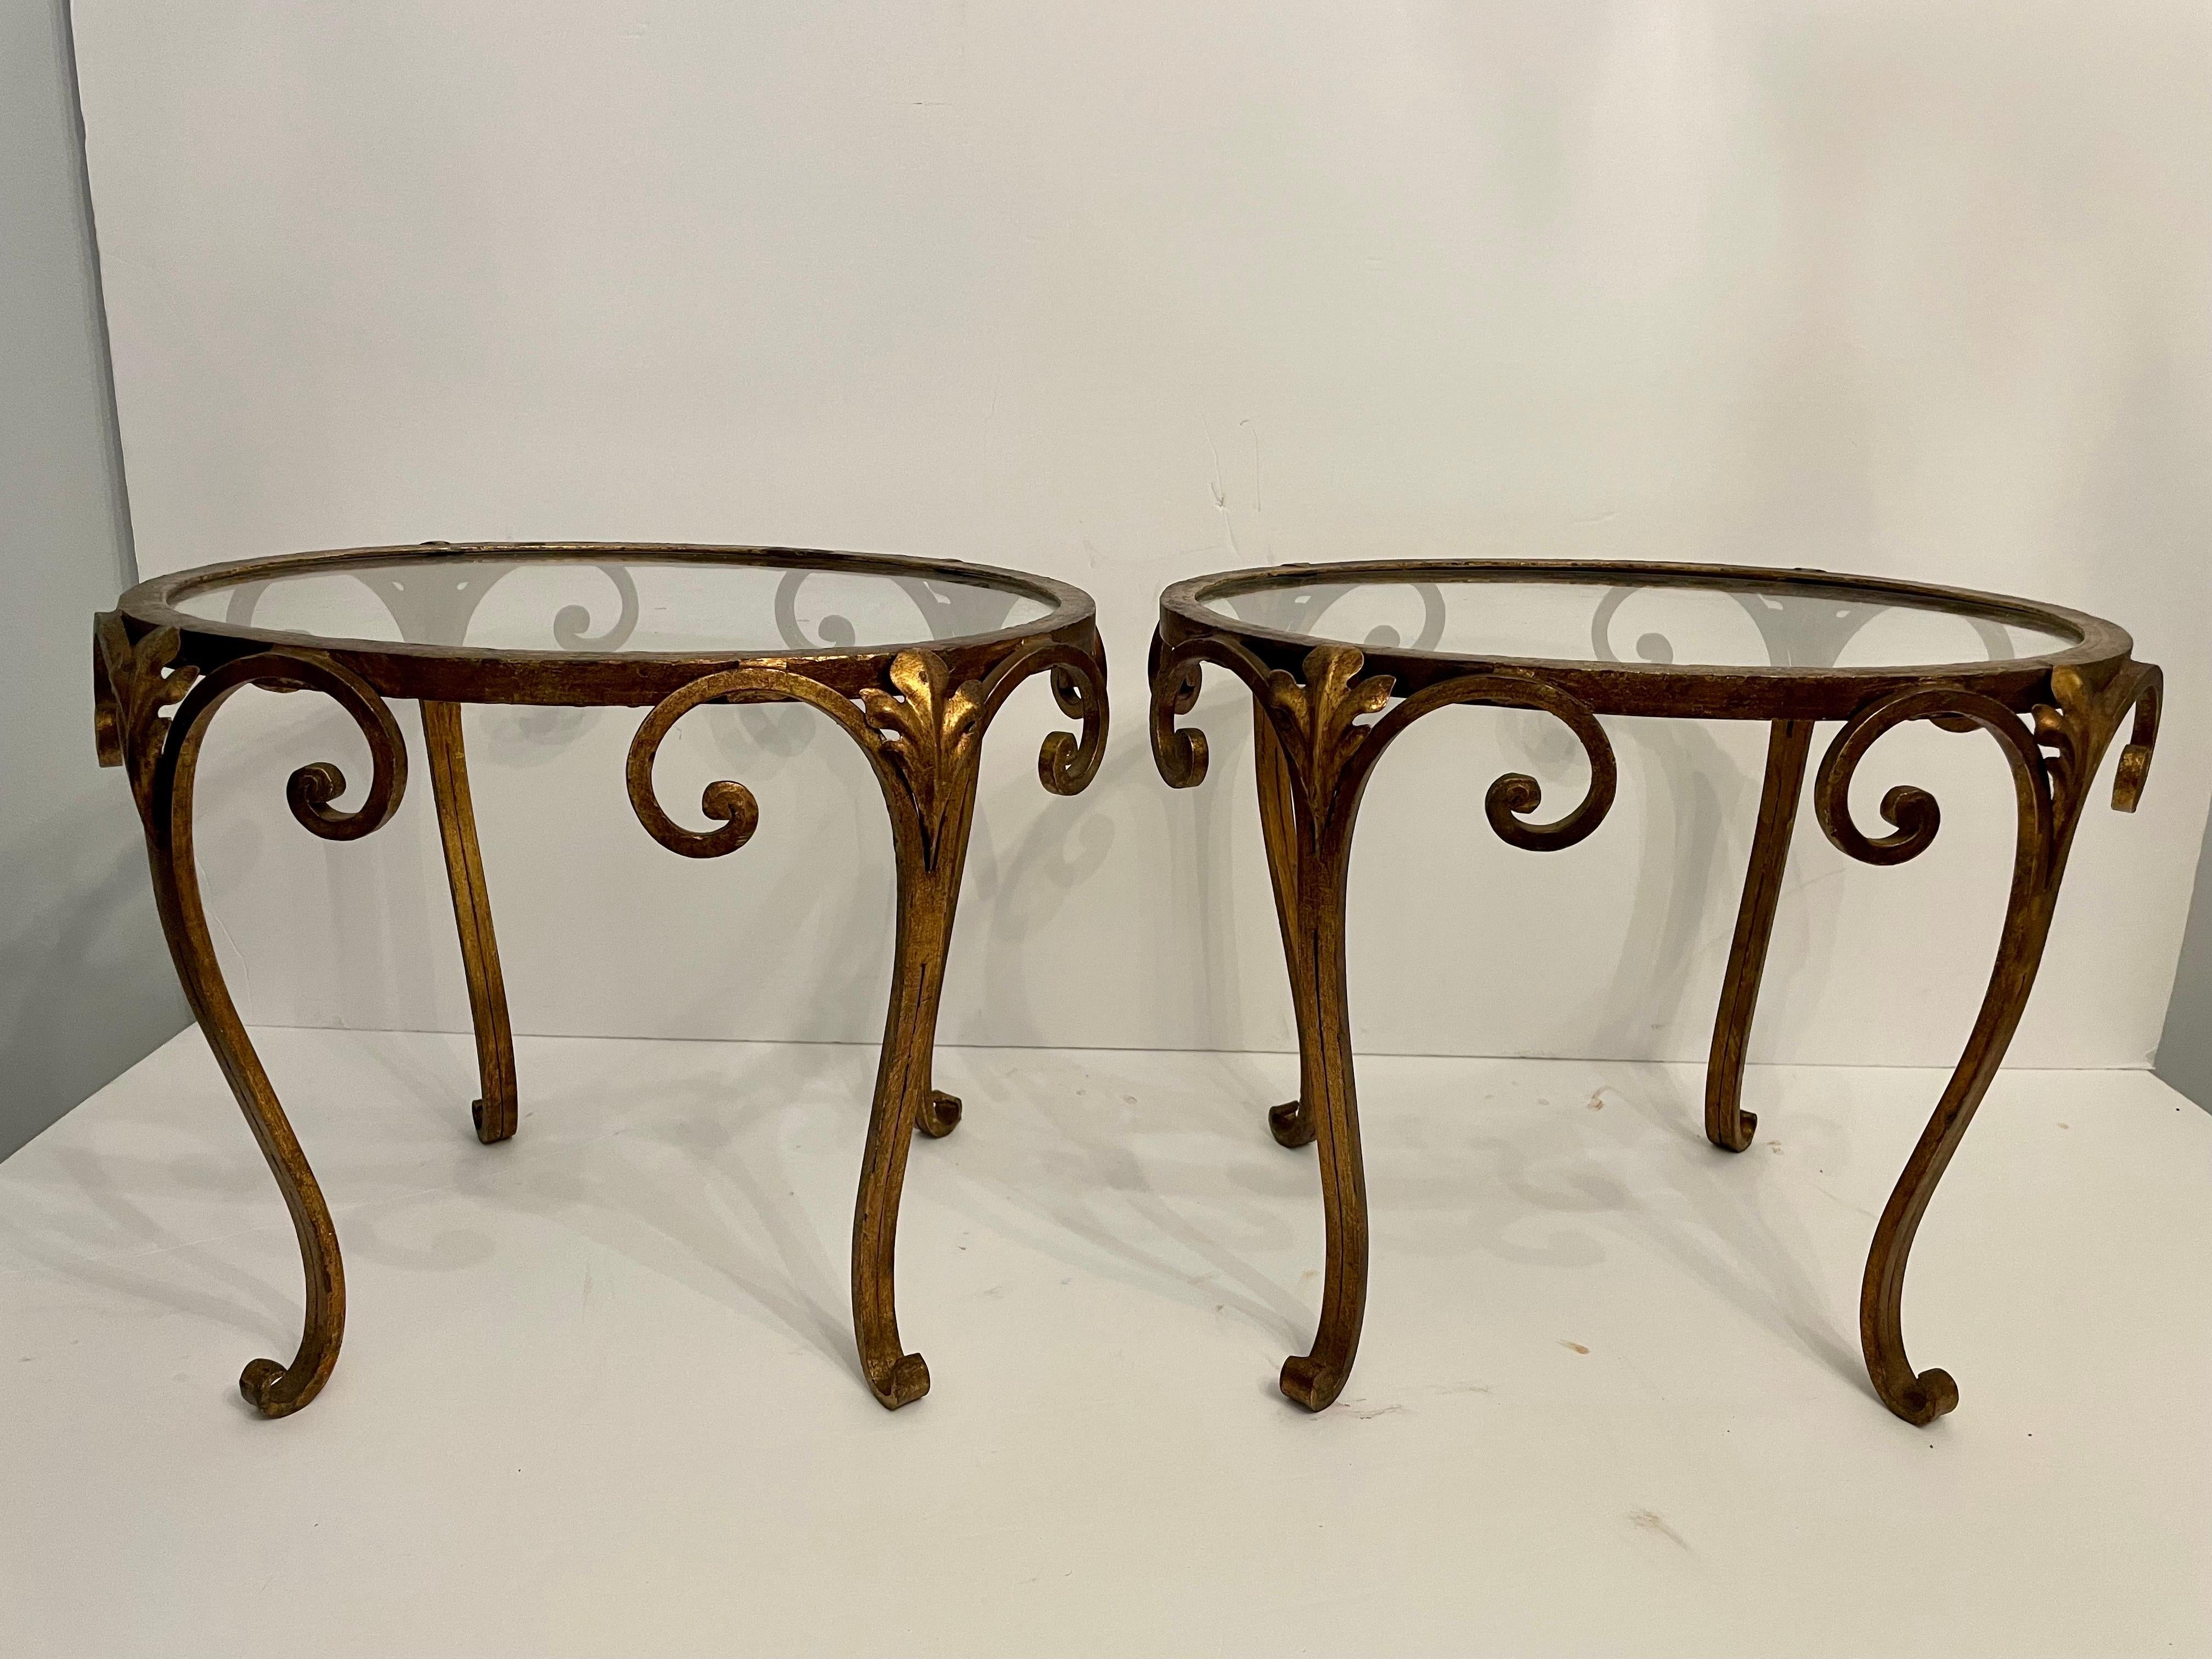 Pair Super Chic French Gilt Wrought Iron And Glass Side Tables. Good overall condition, slight finish loss around top edge, and few scratches to glass due to age and use. Each measures 20